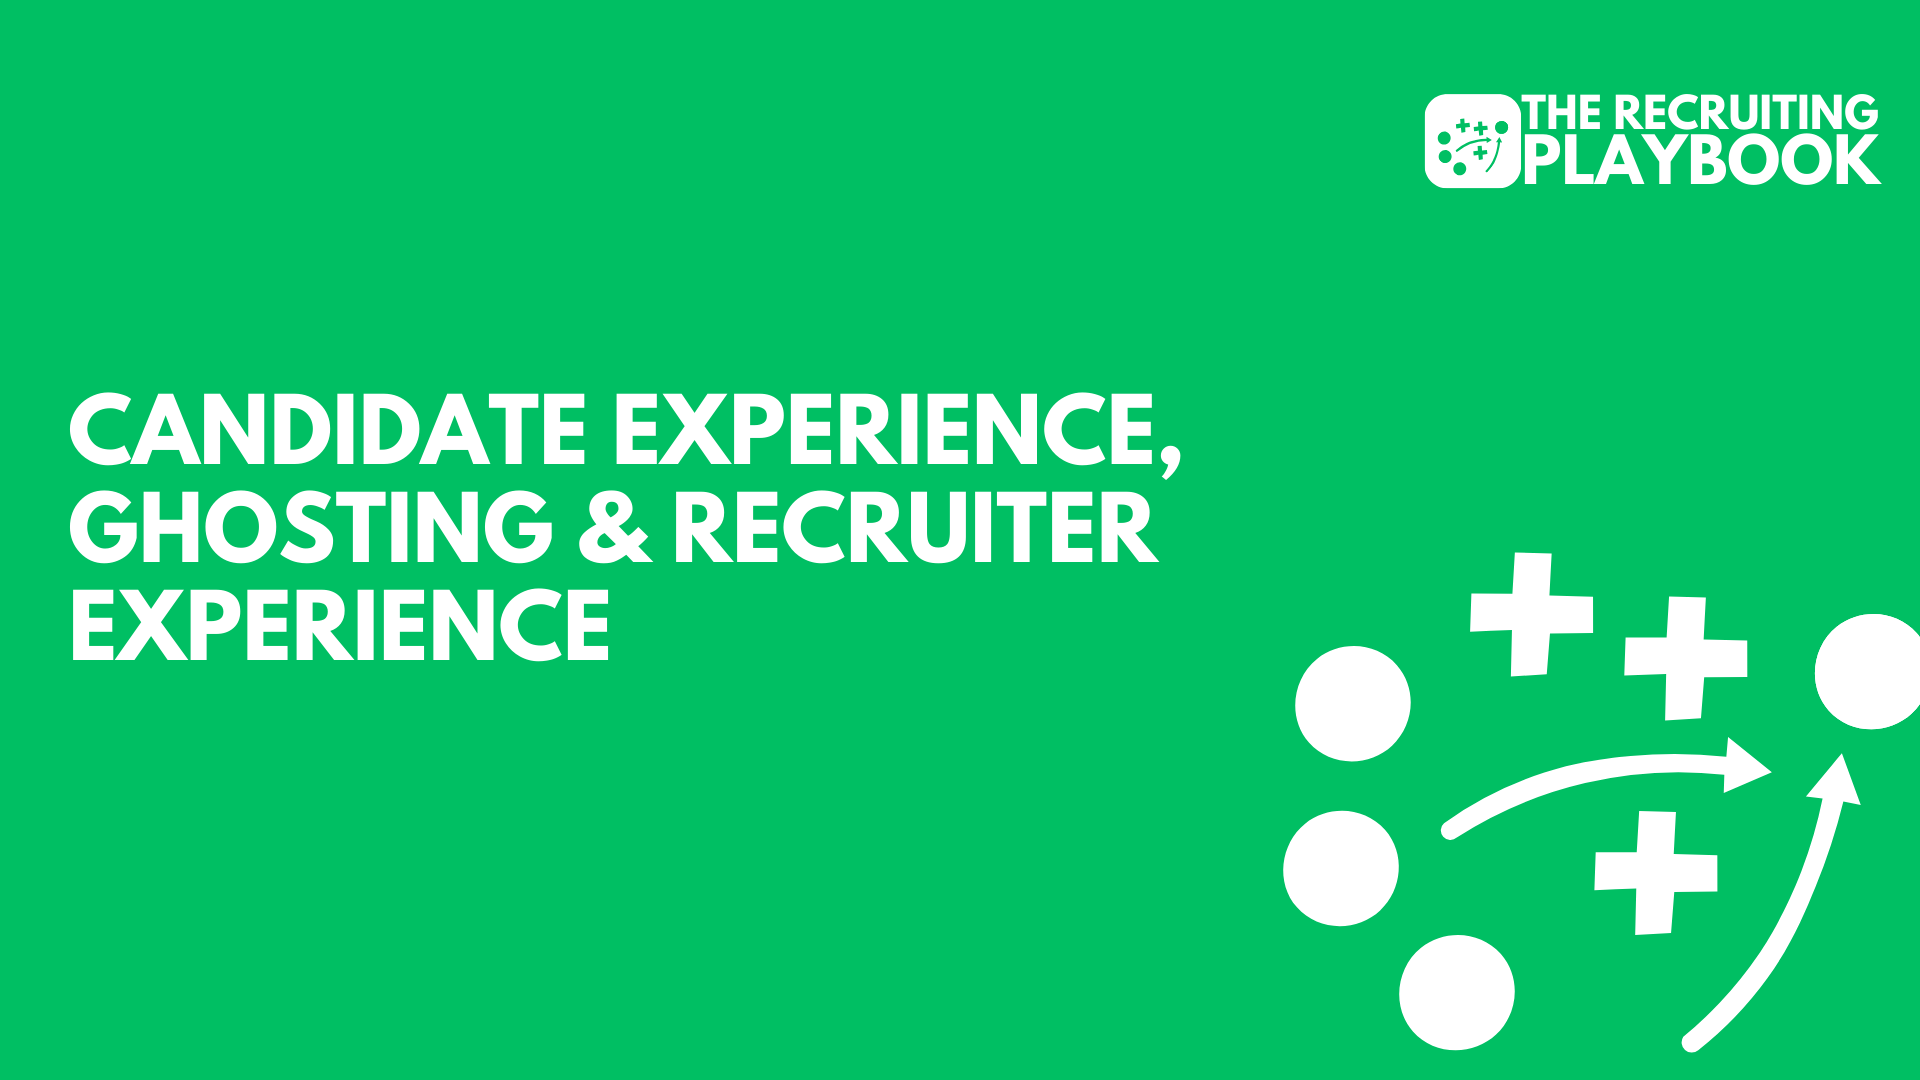 Candidate Experience, Ghosting & Recruiter Experience